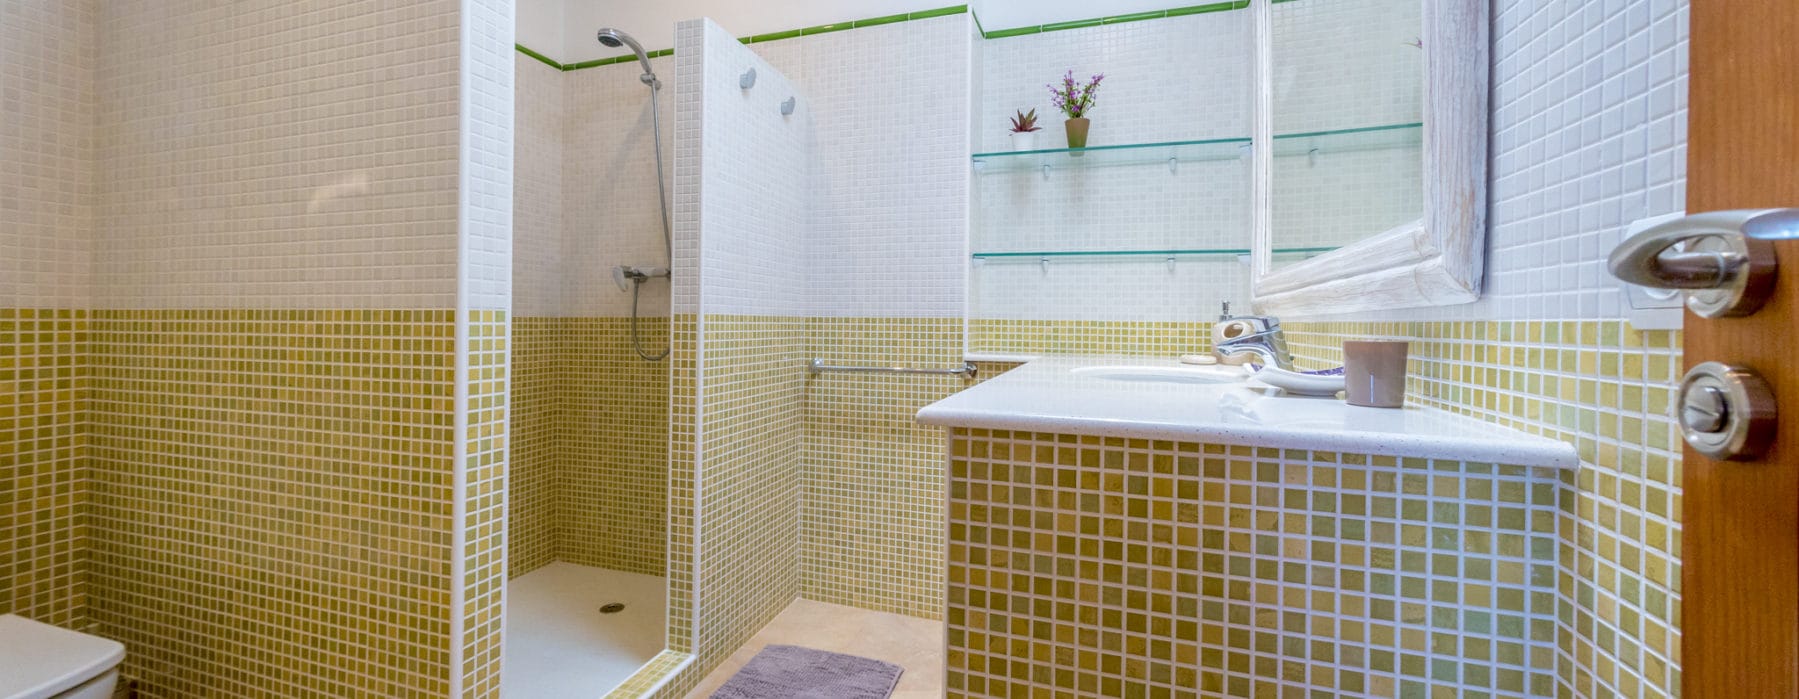 Bathroom with shower in yellow-green mosaic tiles design